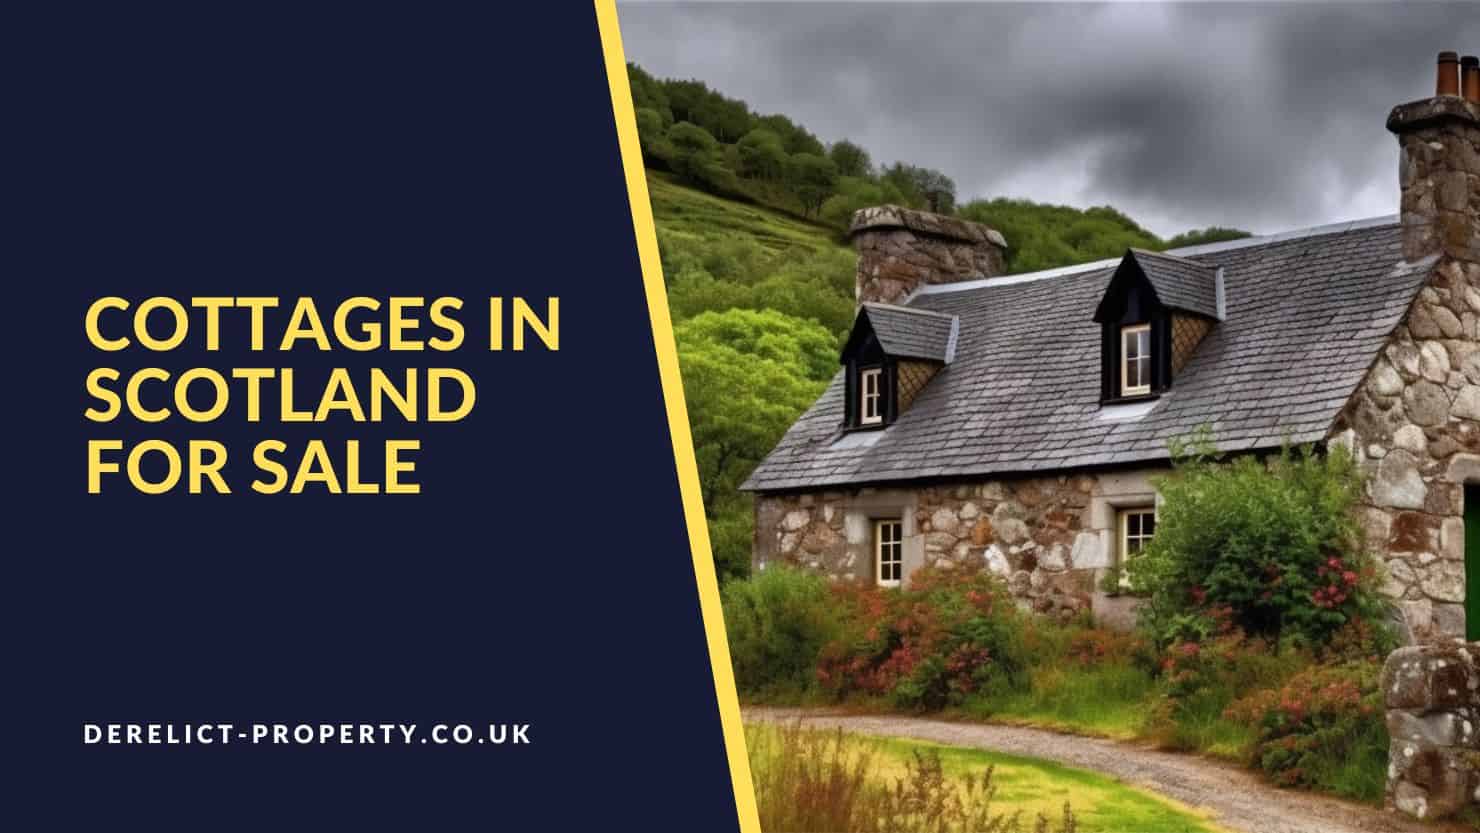 Cottages in Scotland for sale